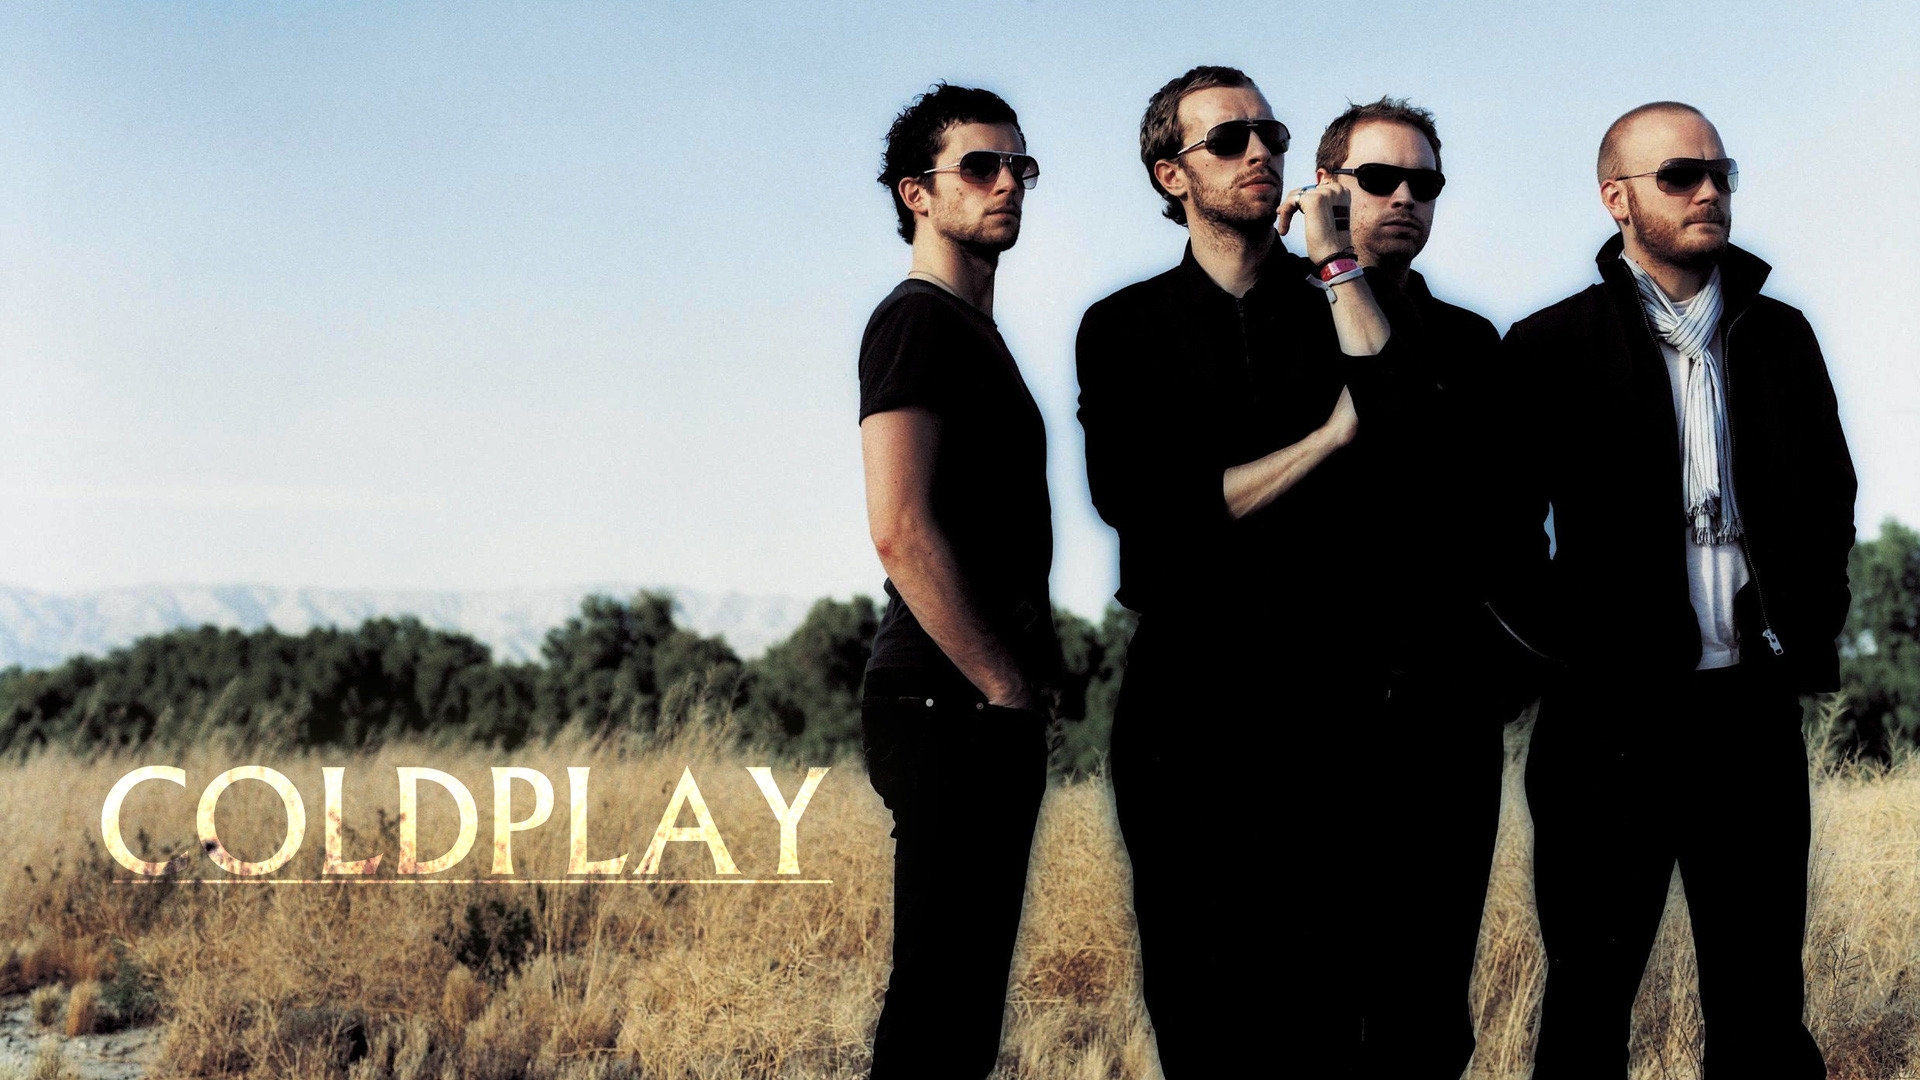 Coldplay Photo for 1920 x 1080 HDTV 1080p resolution